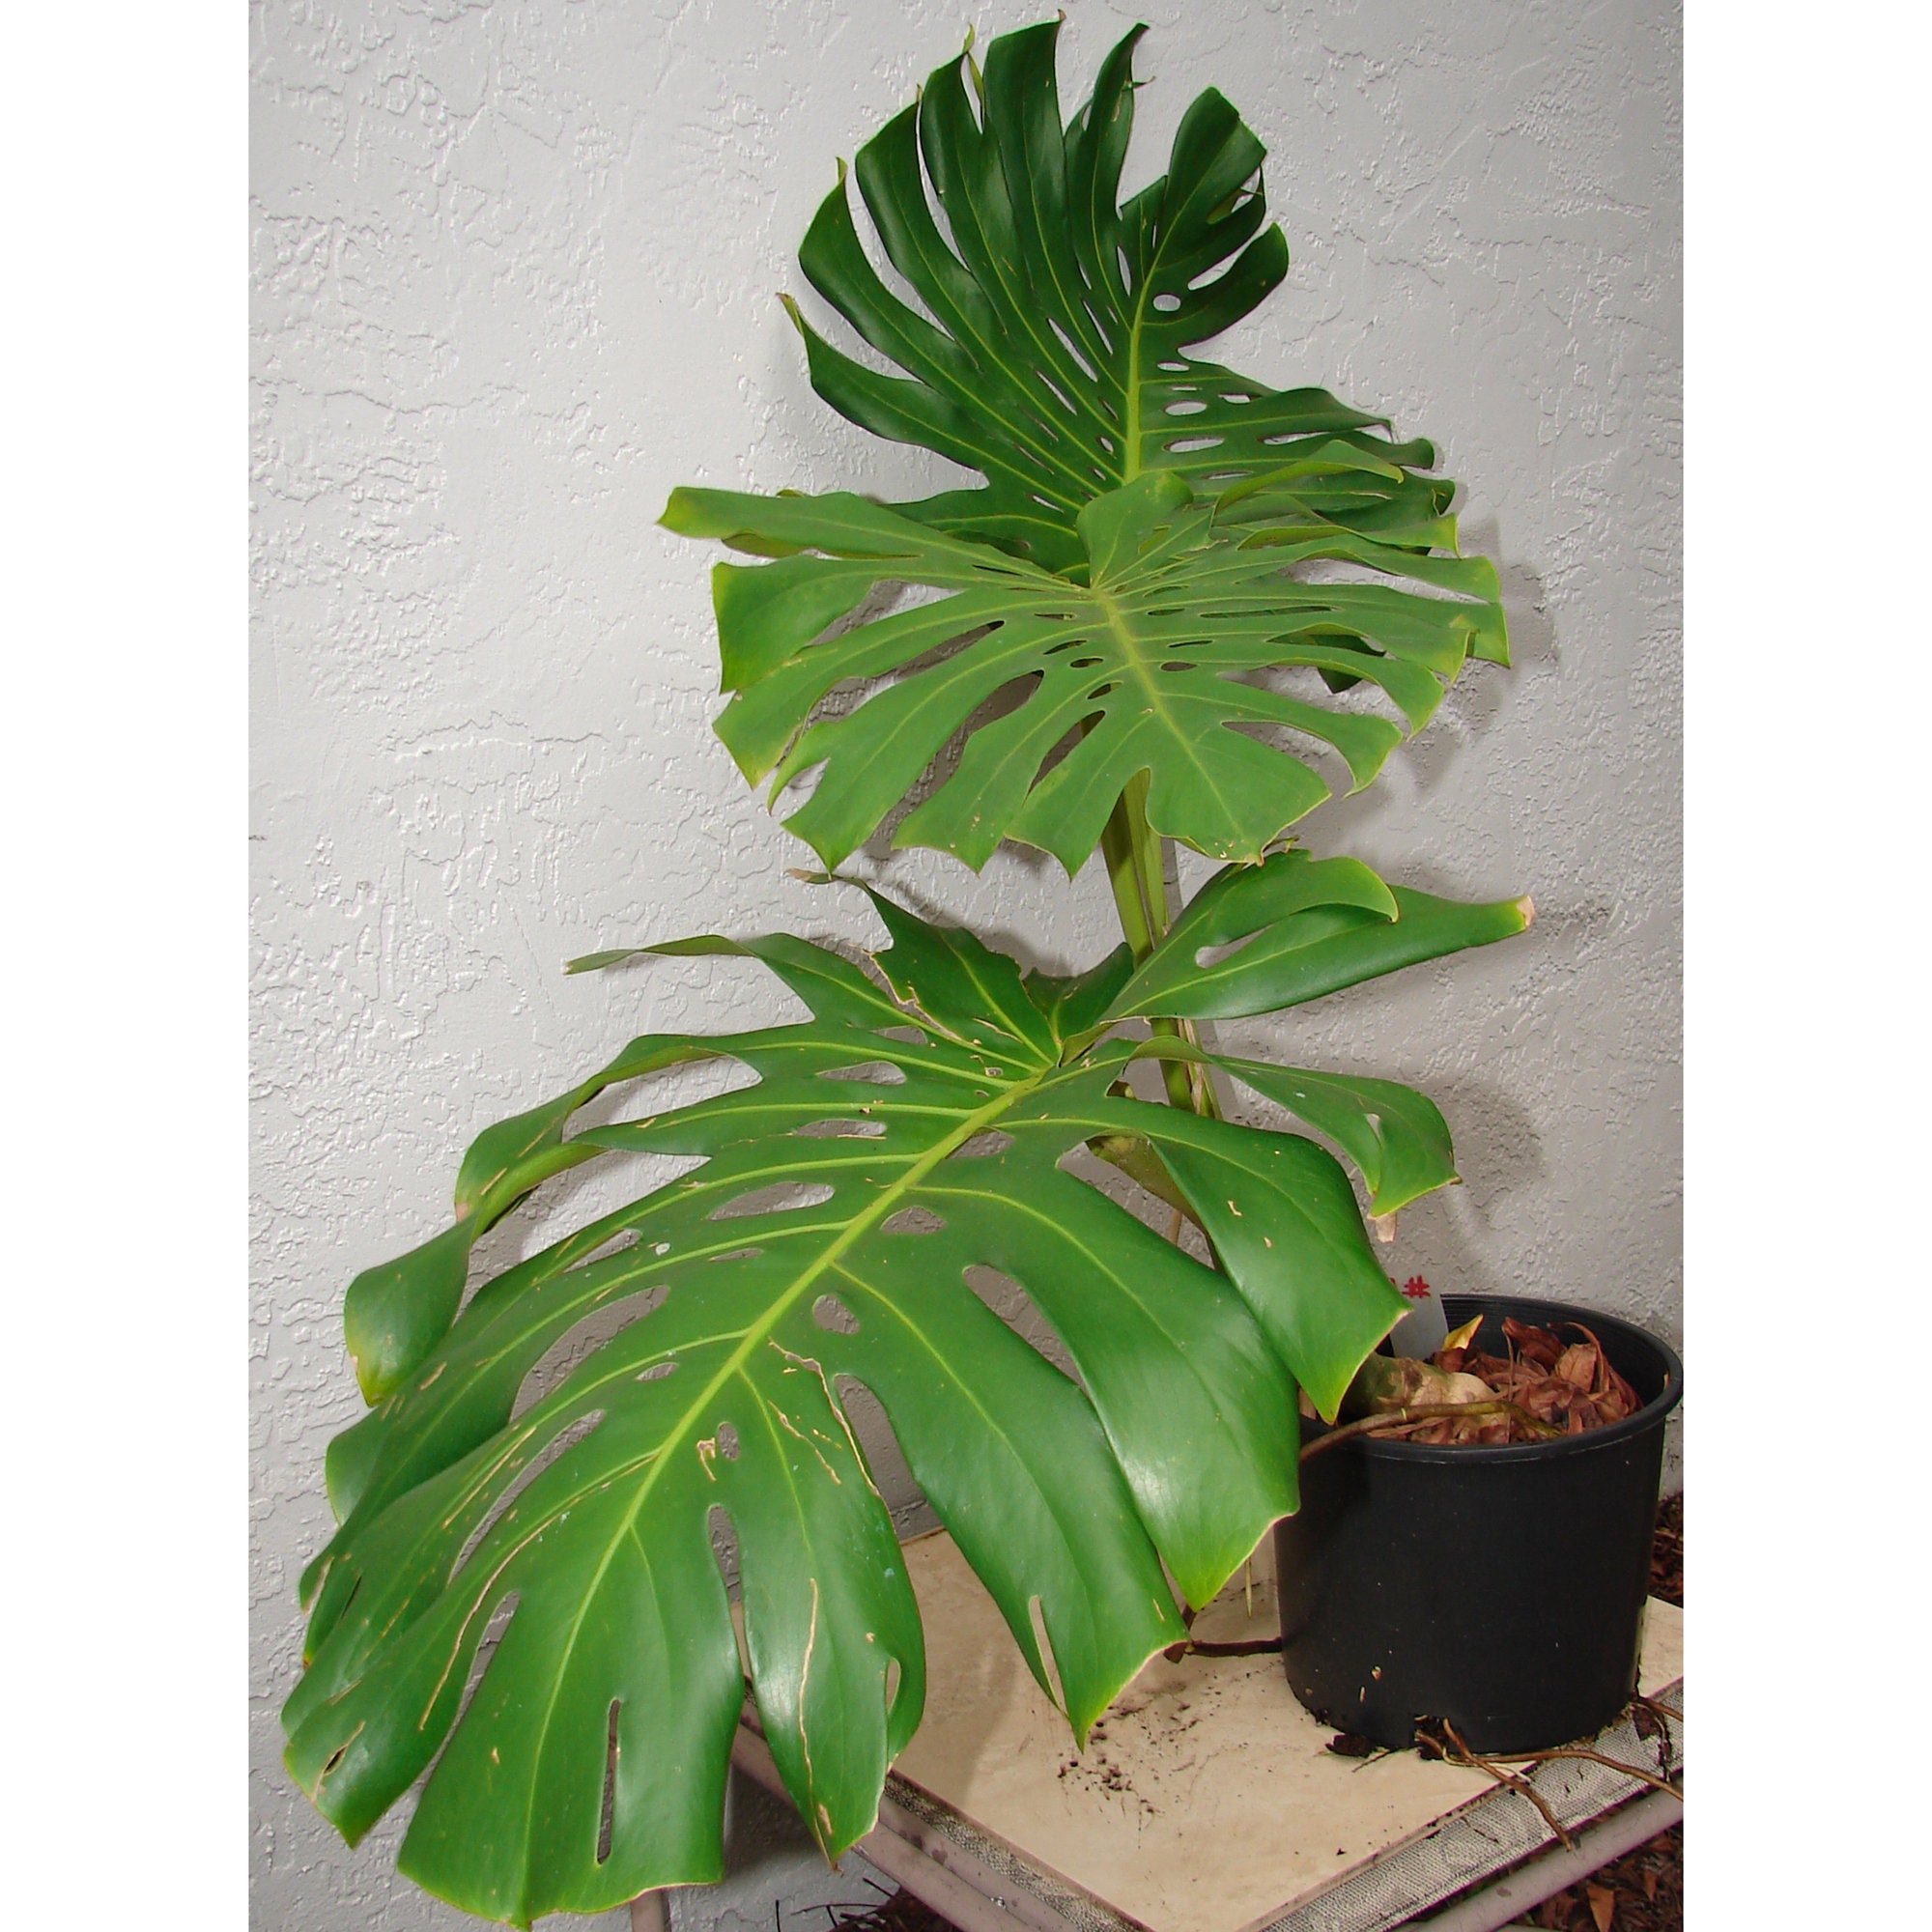 Giant Monstera Deliciosa swiss Cheese Plant, Ceriman, Cutleaf Philodendron,  Mexican Breadfruit 3ft Shipped From Sunny Florida 